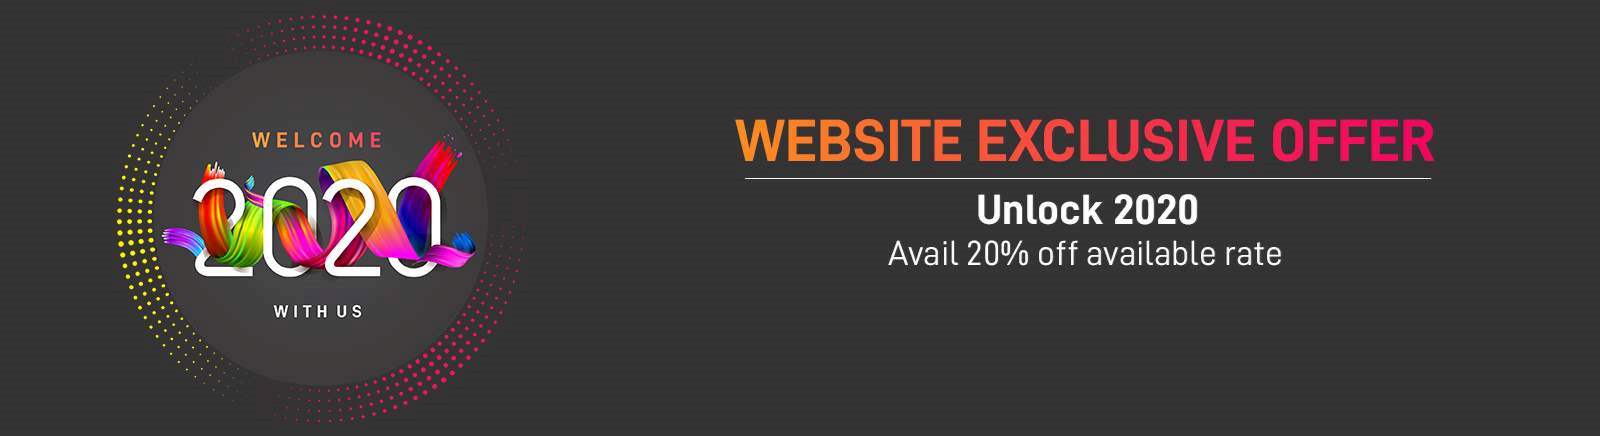 Website Exclusive Rate at Ginger Hotel